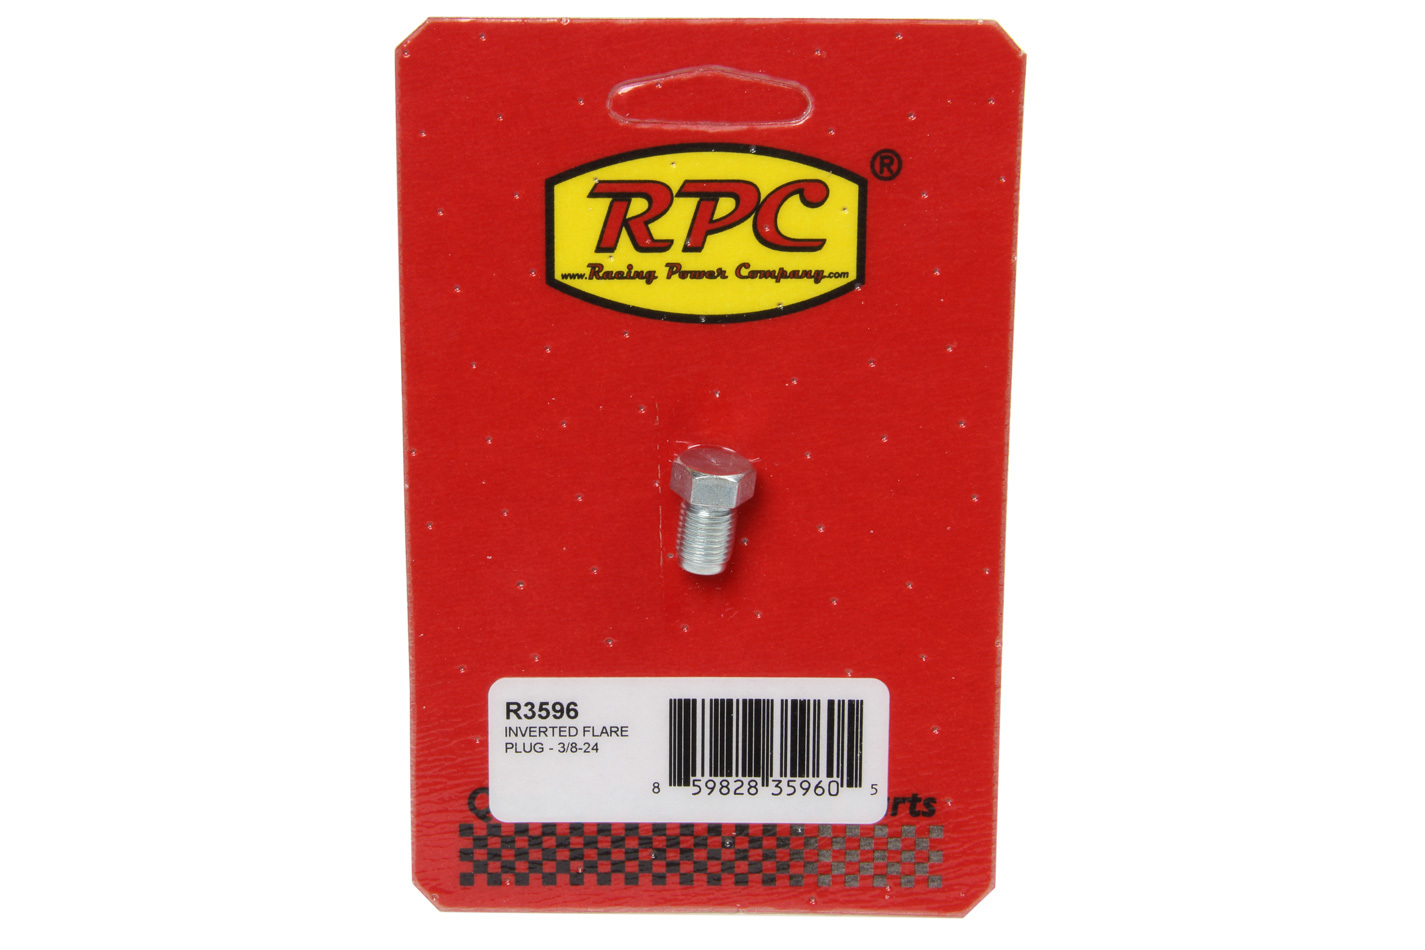 Racing Power Company R3596 - Fitting, Plug, 3/8-24 in Inverted Flare Male, Hex Head, Steel, Zinc Oxide, Each